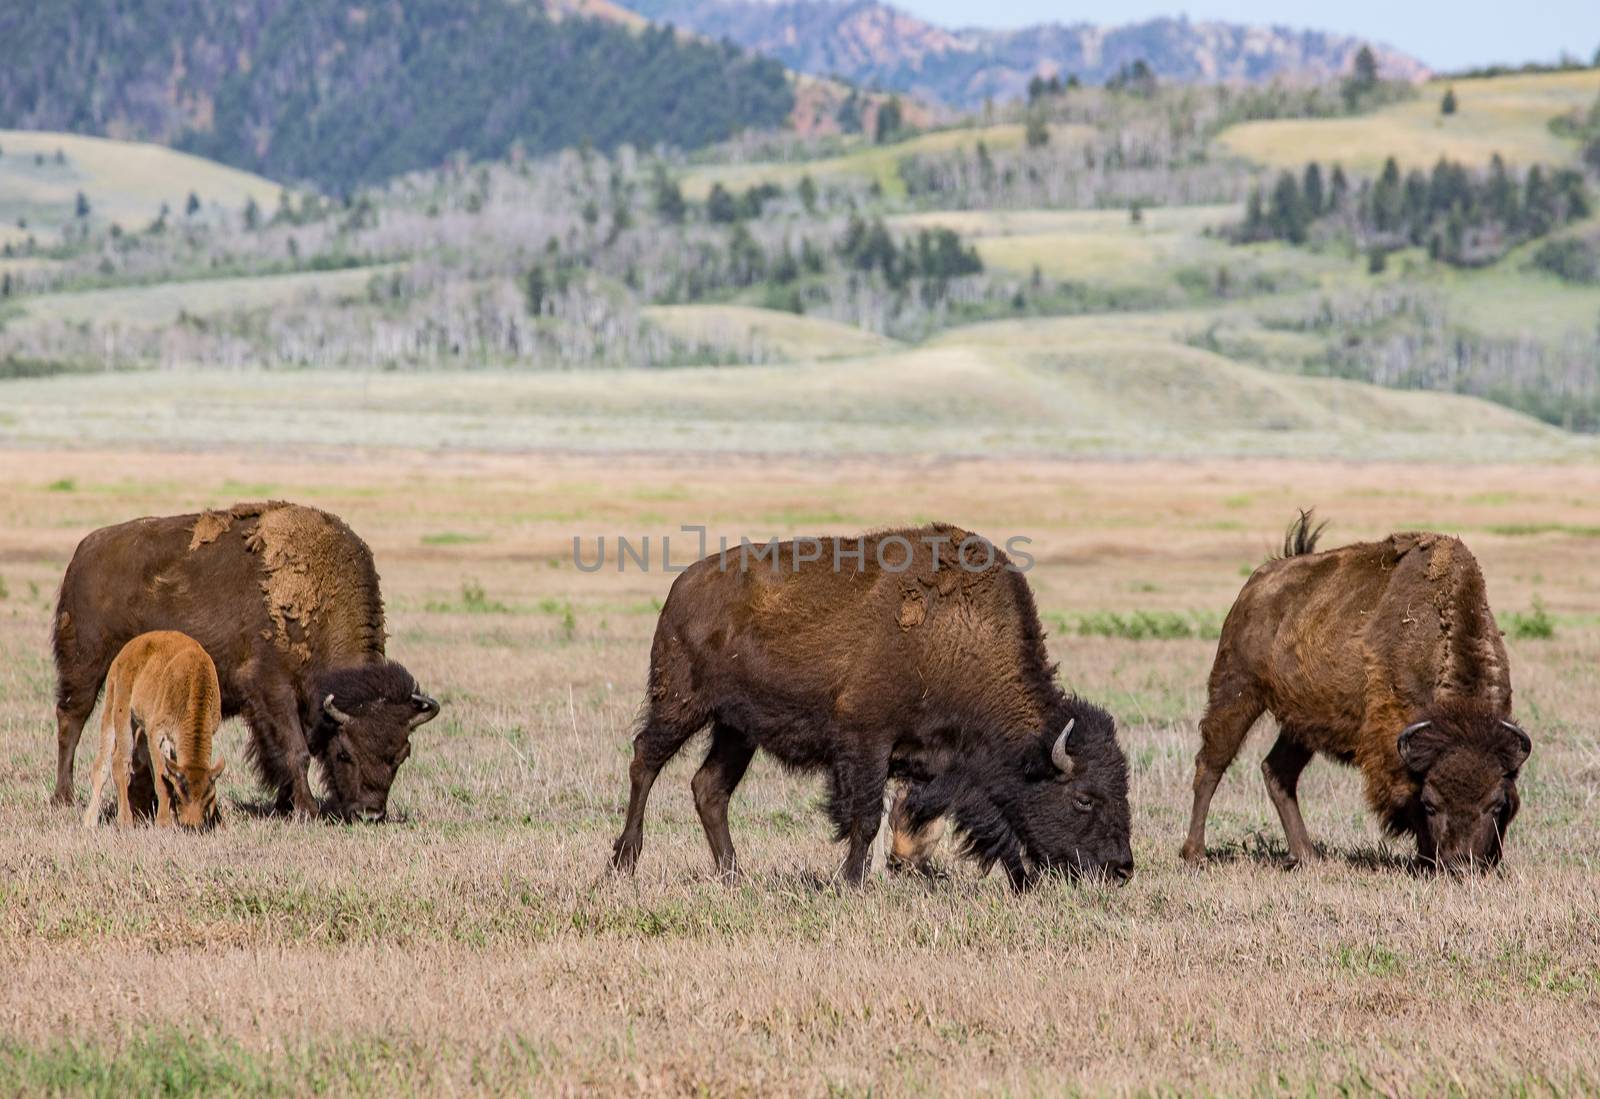 American bison in Jackson Hole, Wyoming.